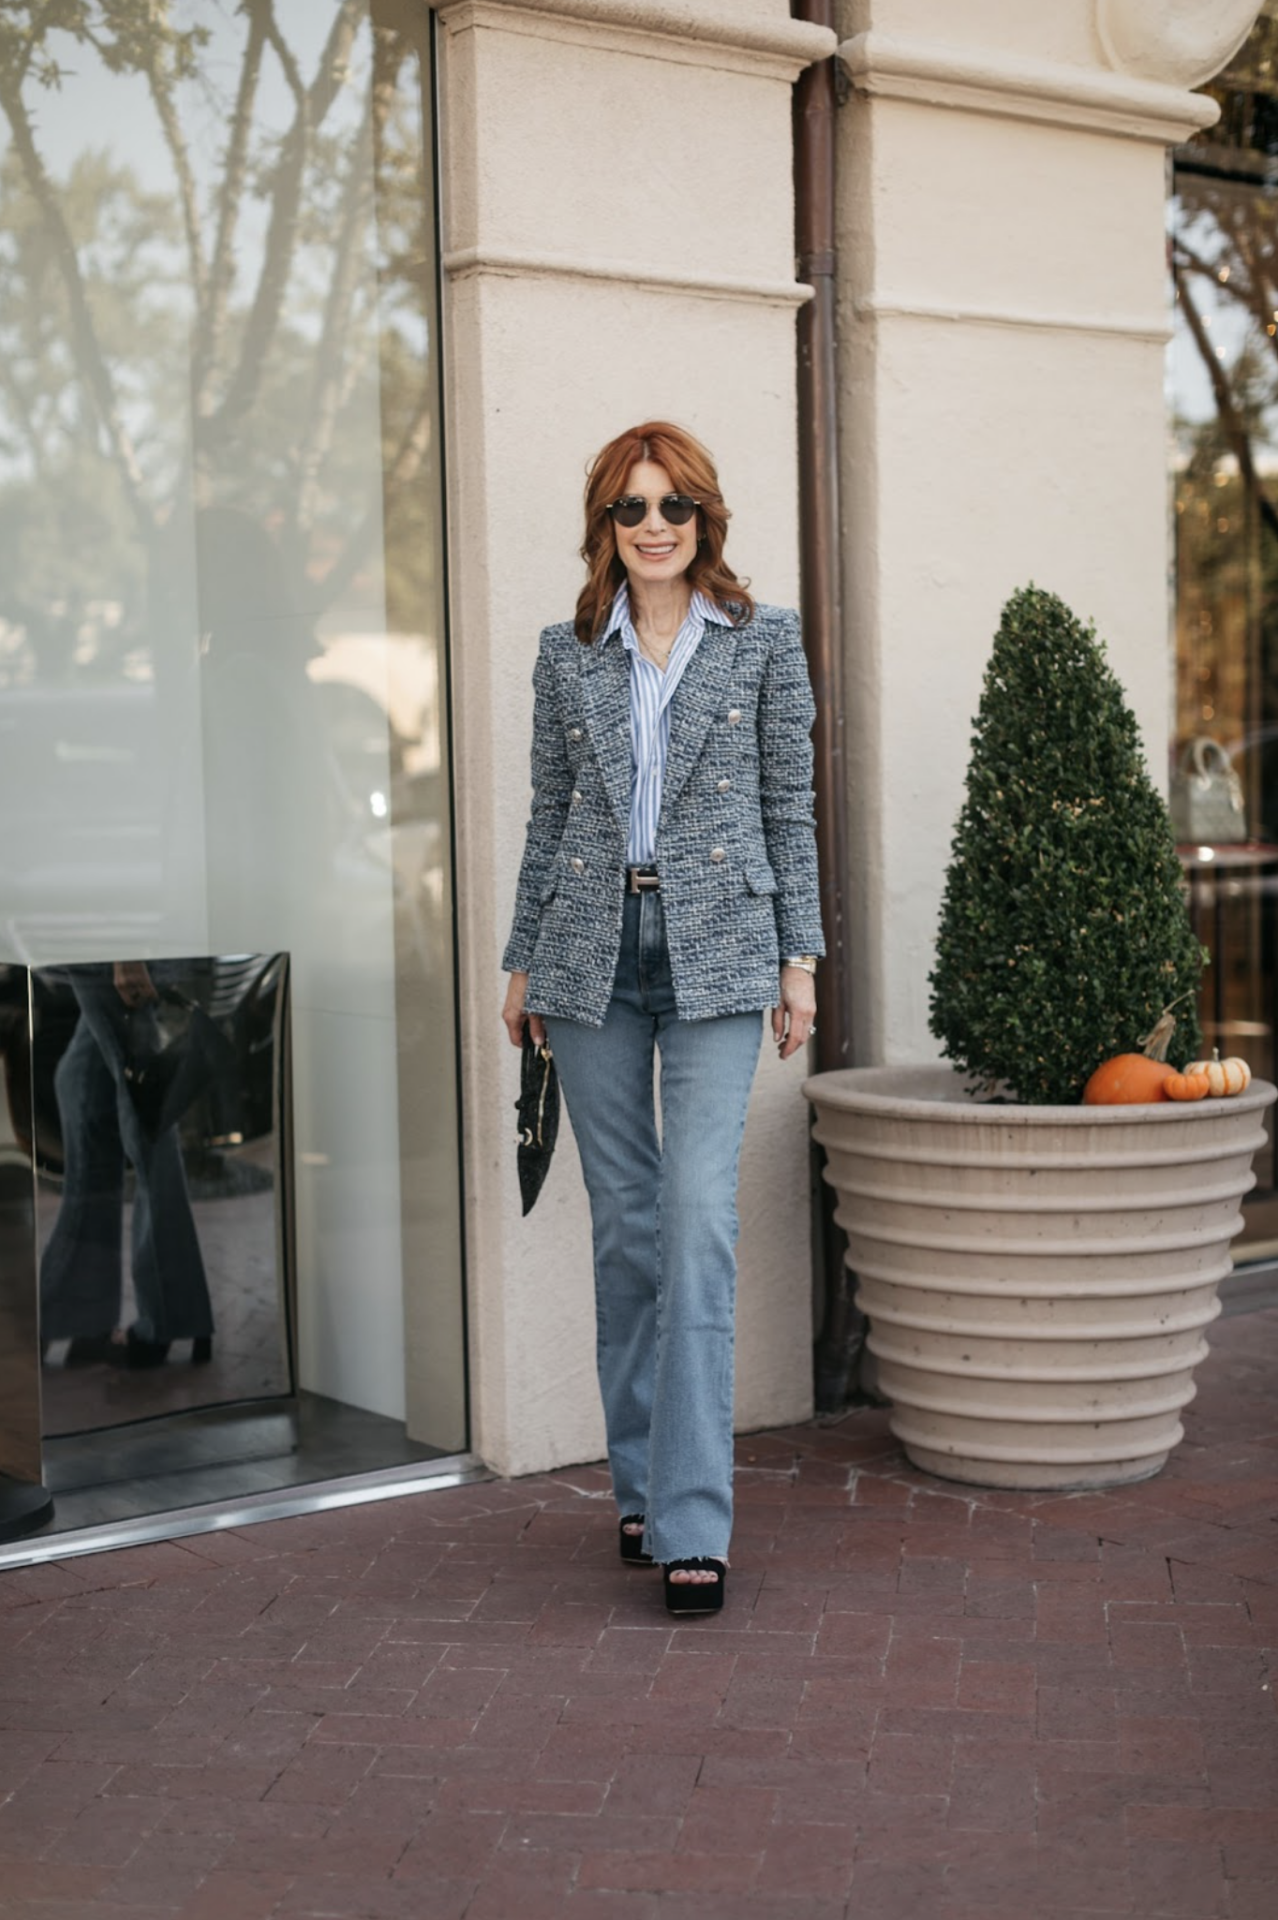 How to elevate a denim look